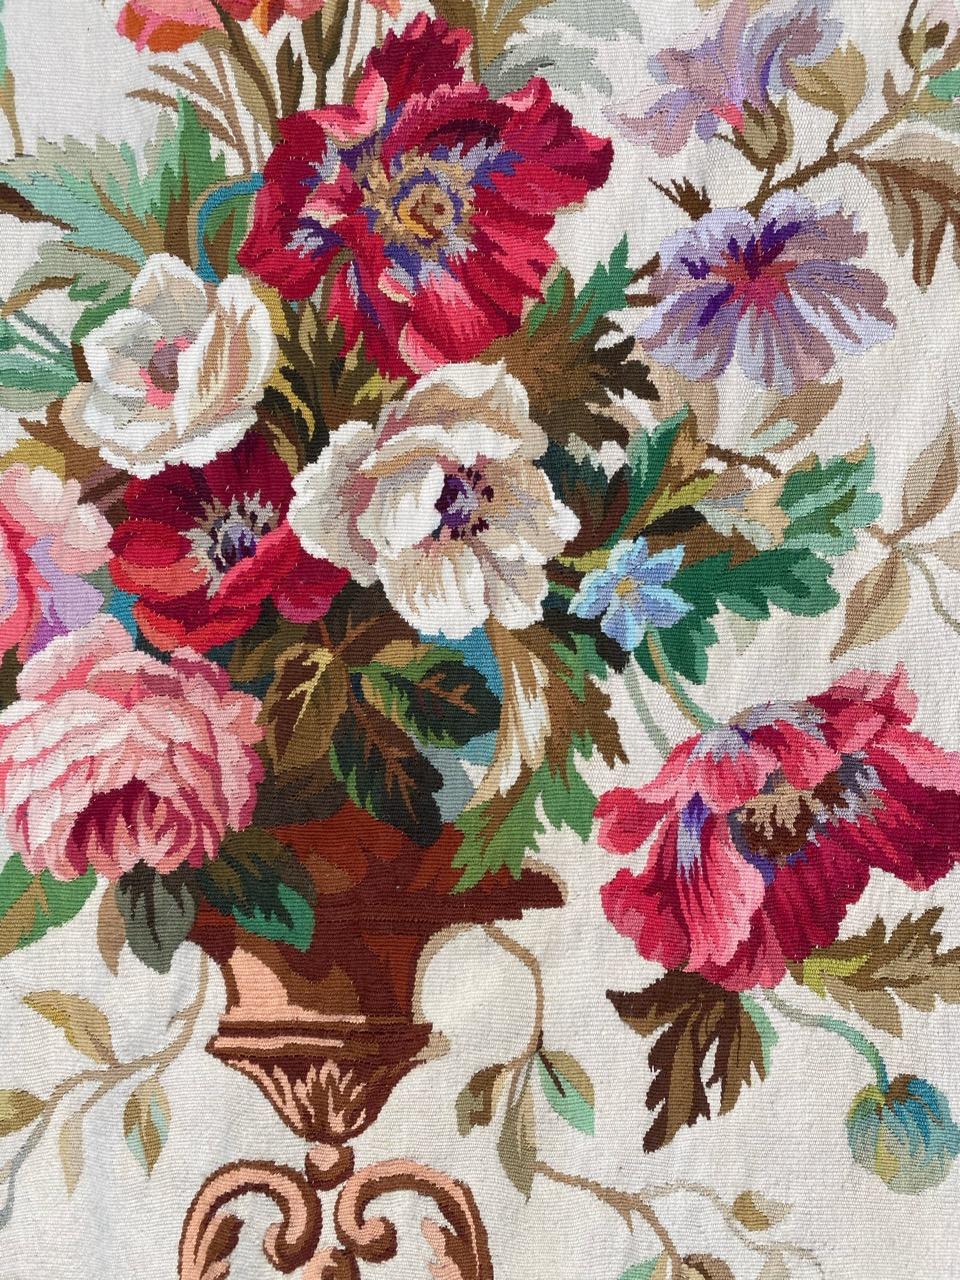 Hand-Woven Nice Antique French Aubusson Tapestry Panel